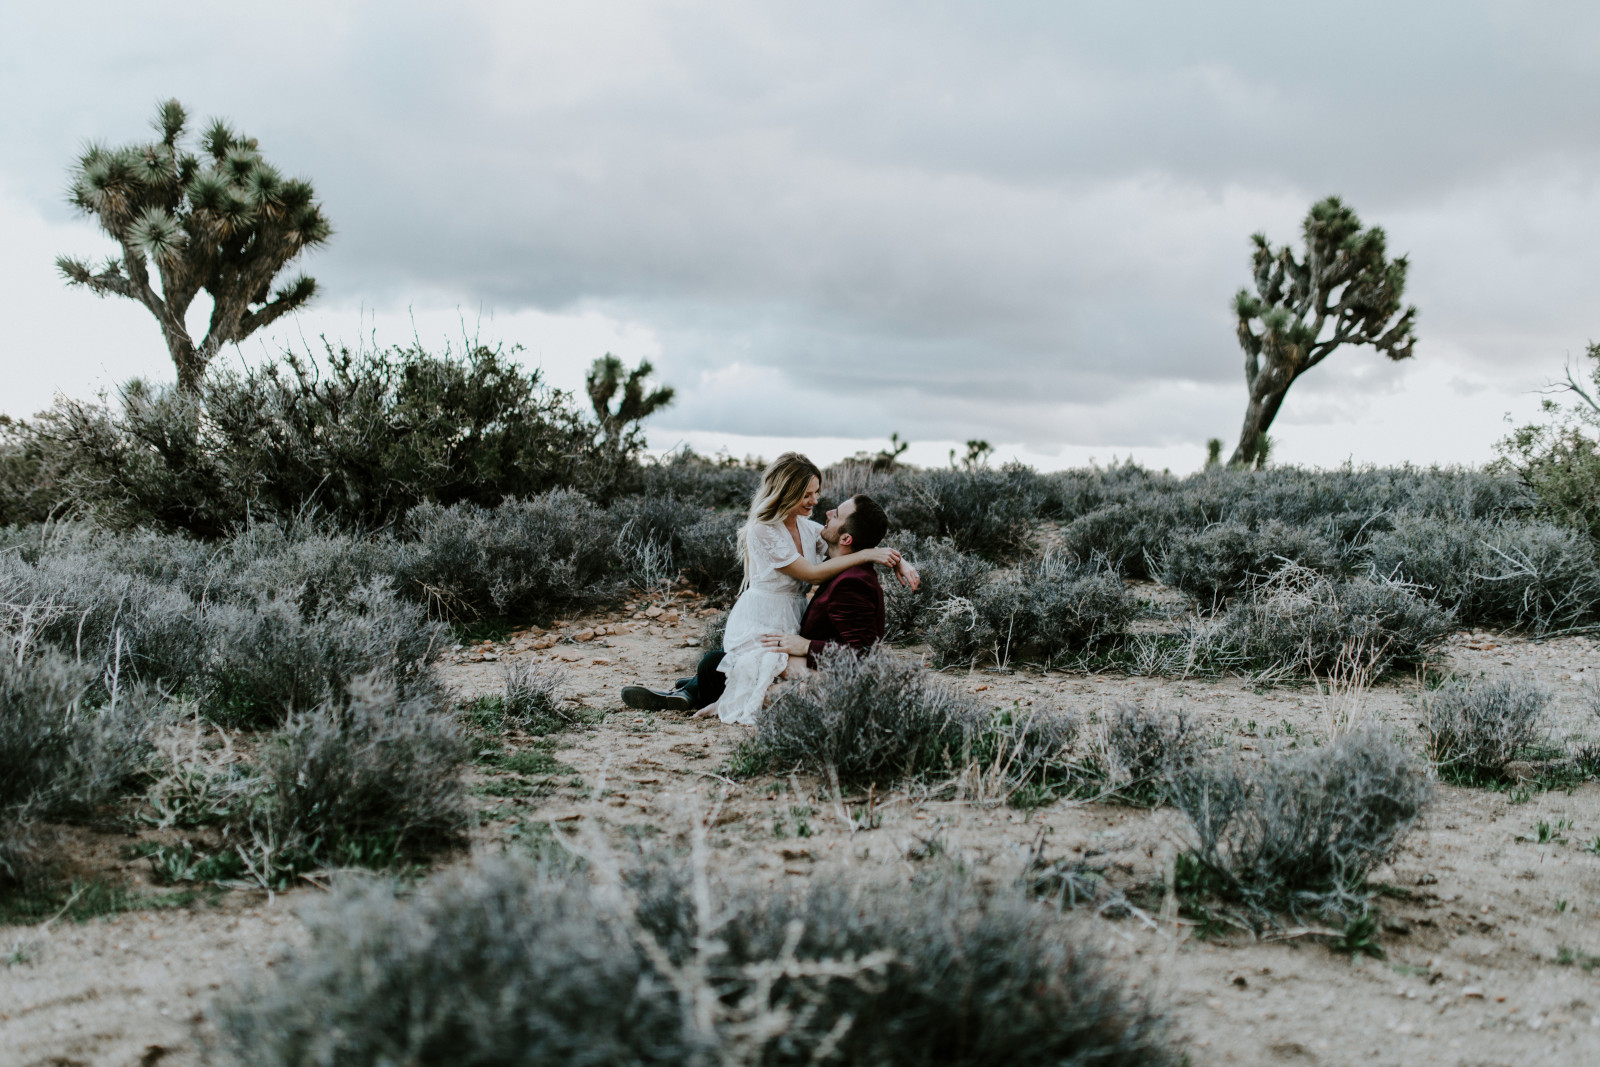 Alyssa and Jeremy share a moment at Joshua Tree. Elopement wedding photography at Joshua Tree National Park by Sienna Plus Josh.